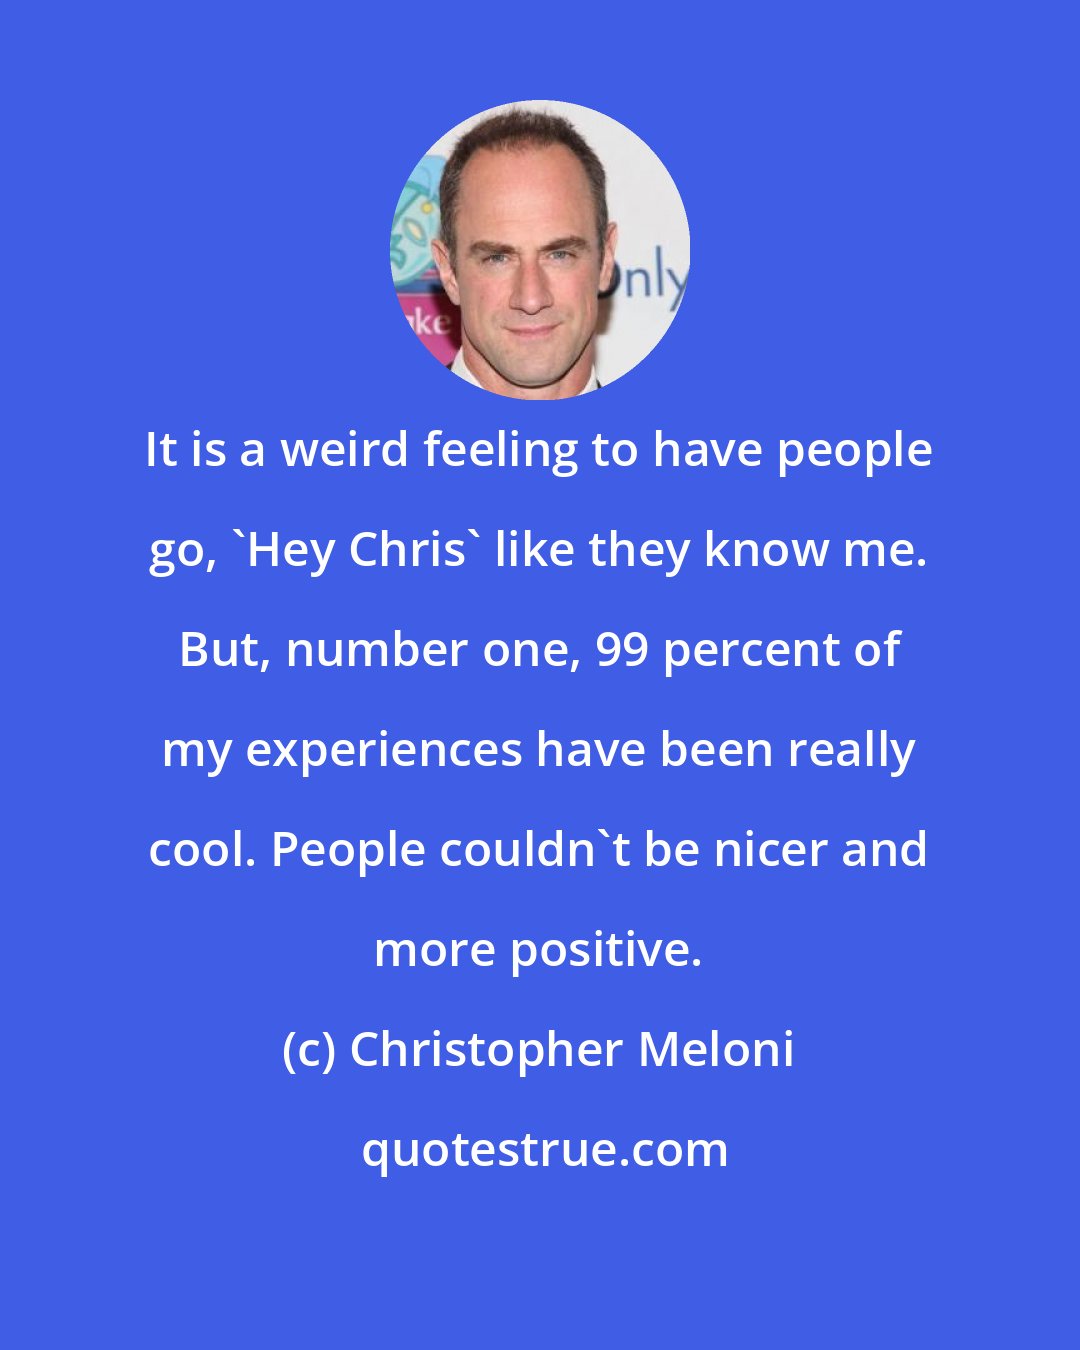 Christopher Meloni: It is a weird feeling to have people go, 'Hey Chris' like they know me. But, number one, 99 percent of my experiences have been really cool. People couldn't be nicer and more positive.